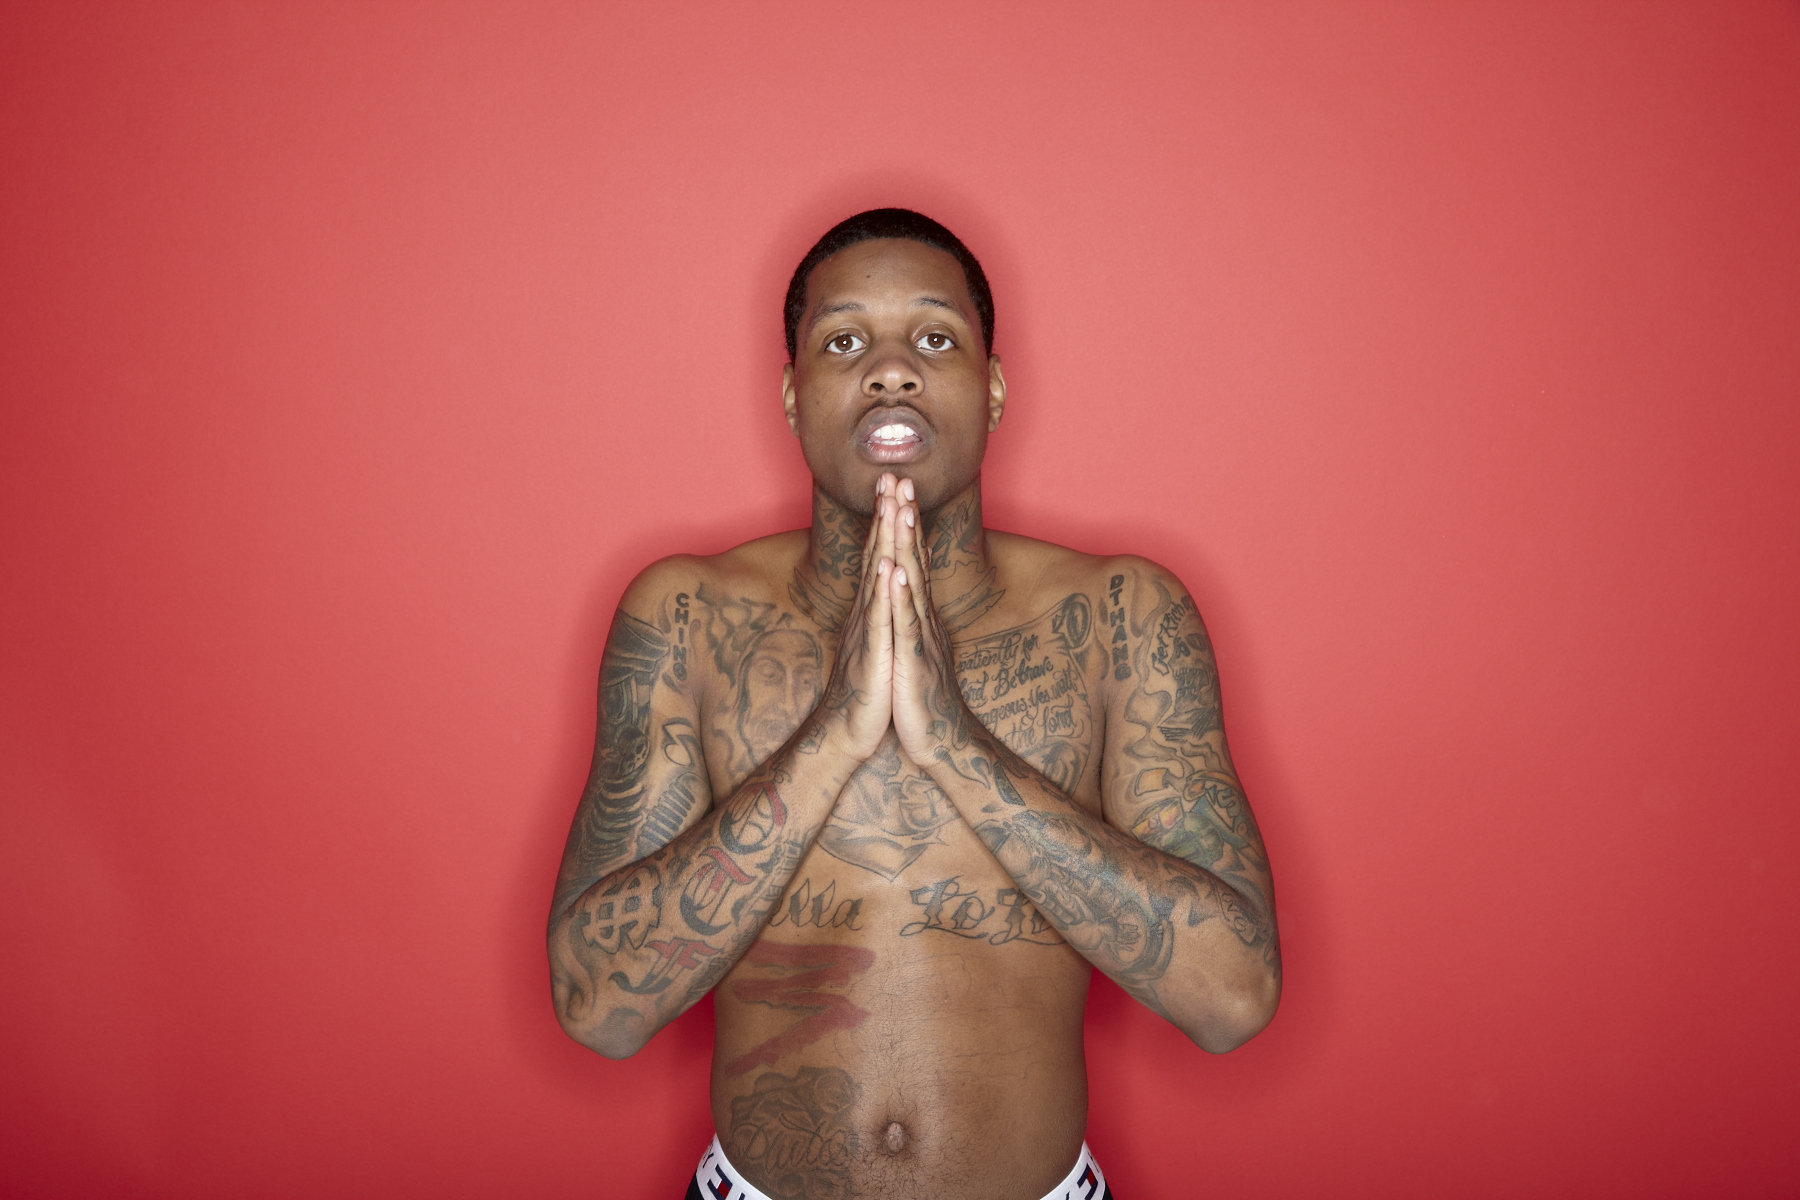 Download Lil Durk striking a pose in a stylish outfit | Wallpapers.com